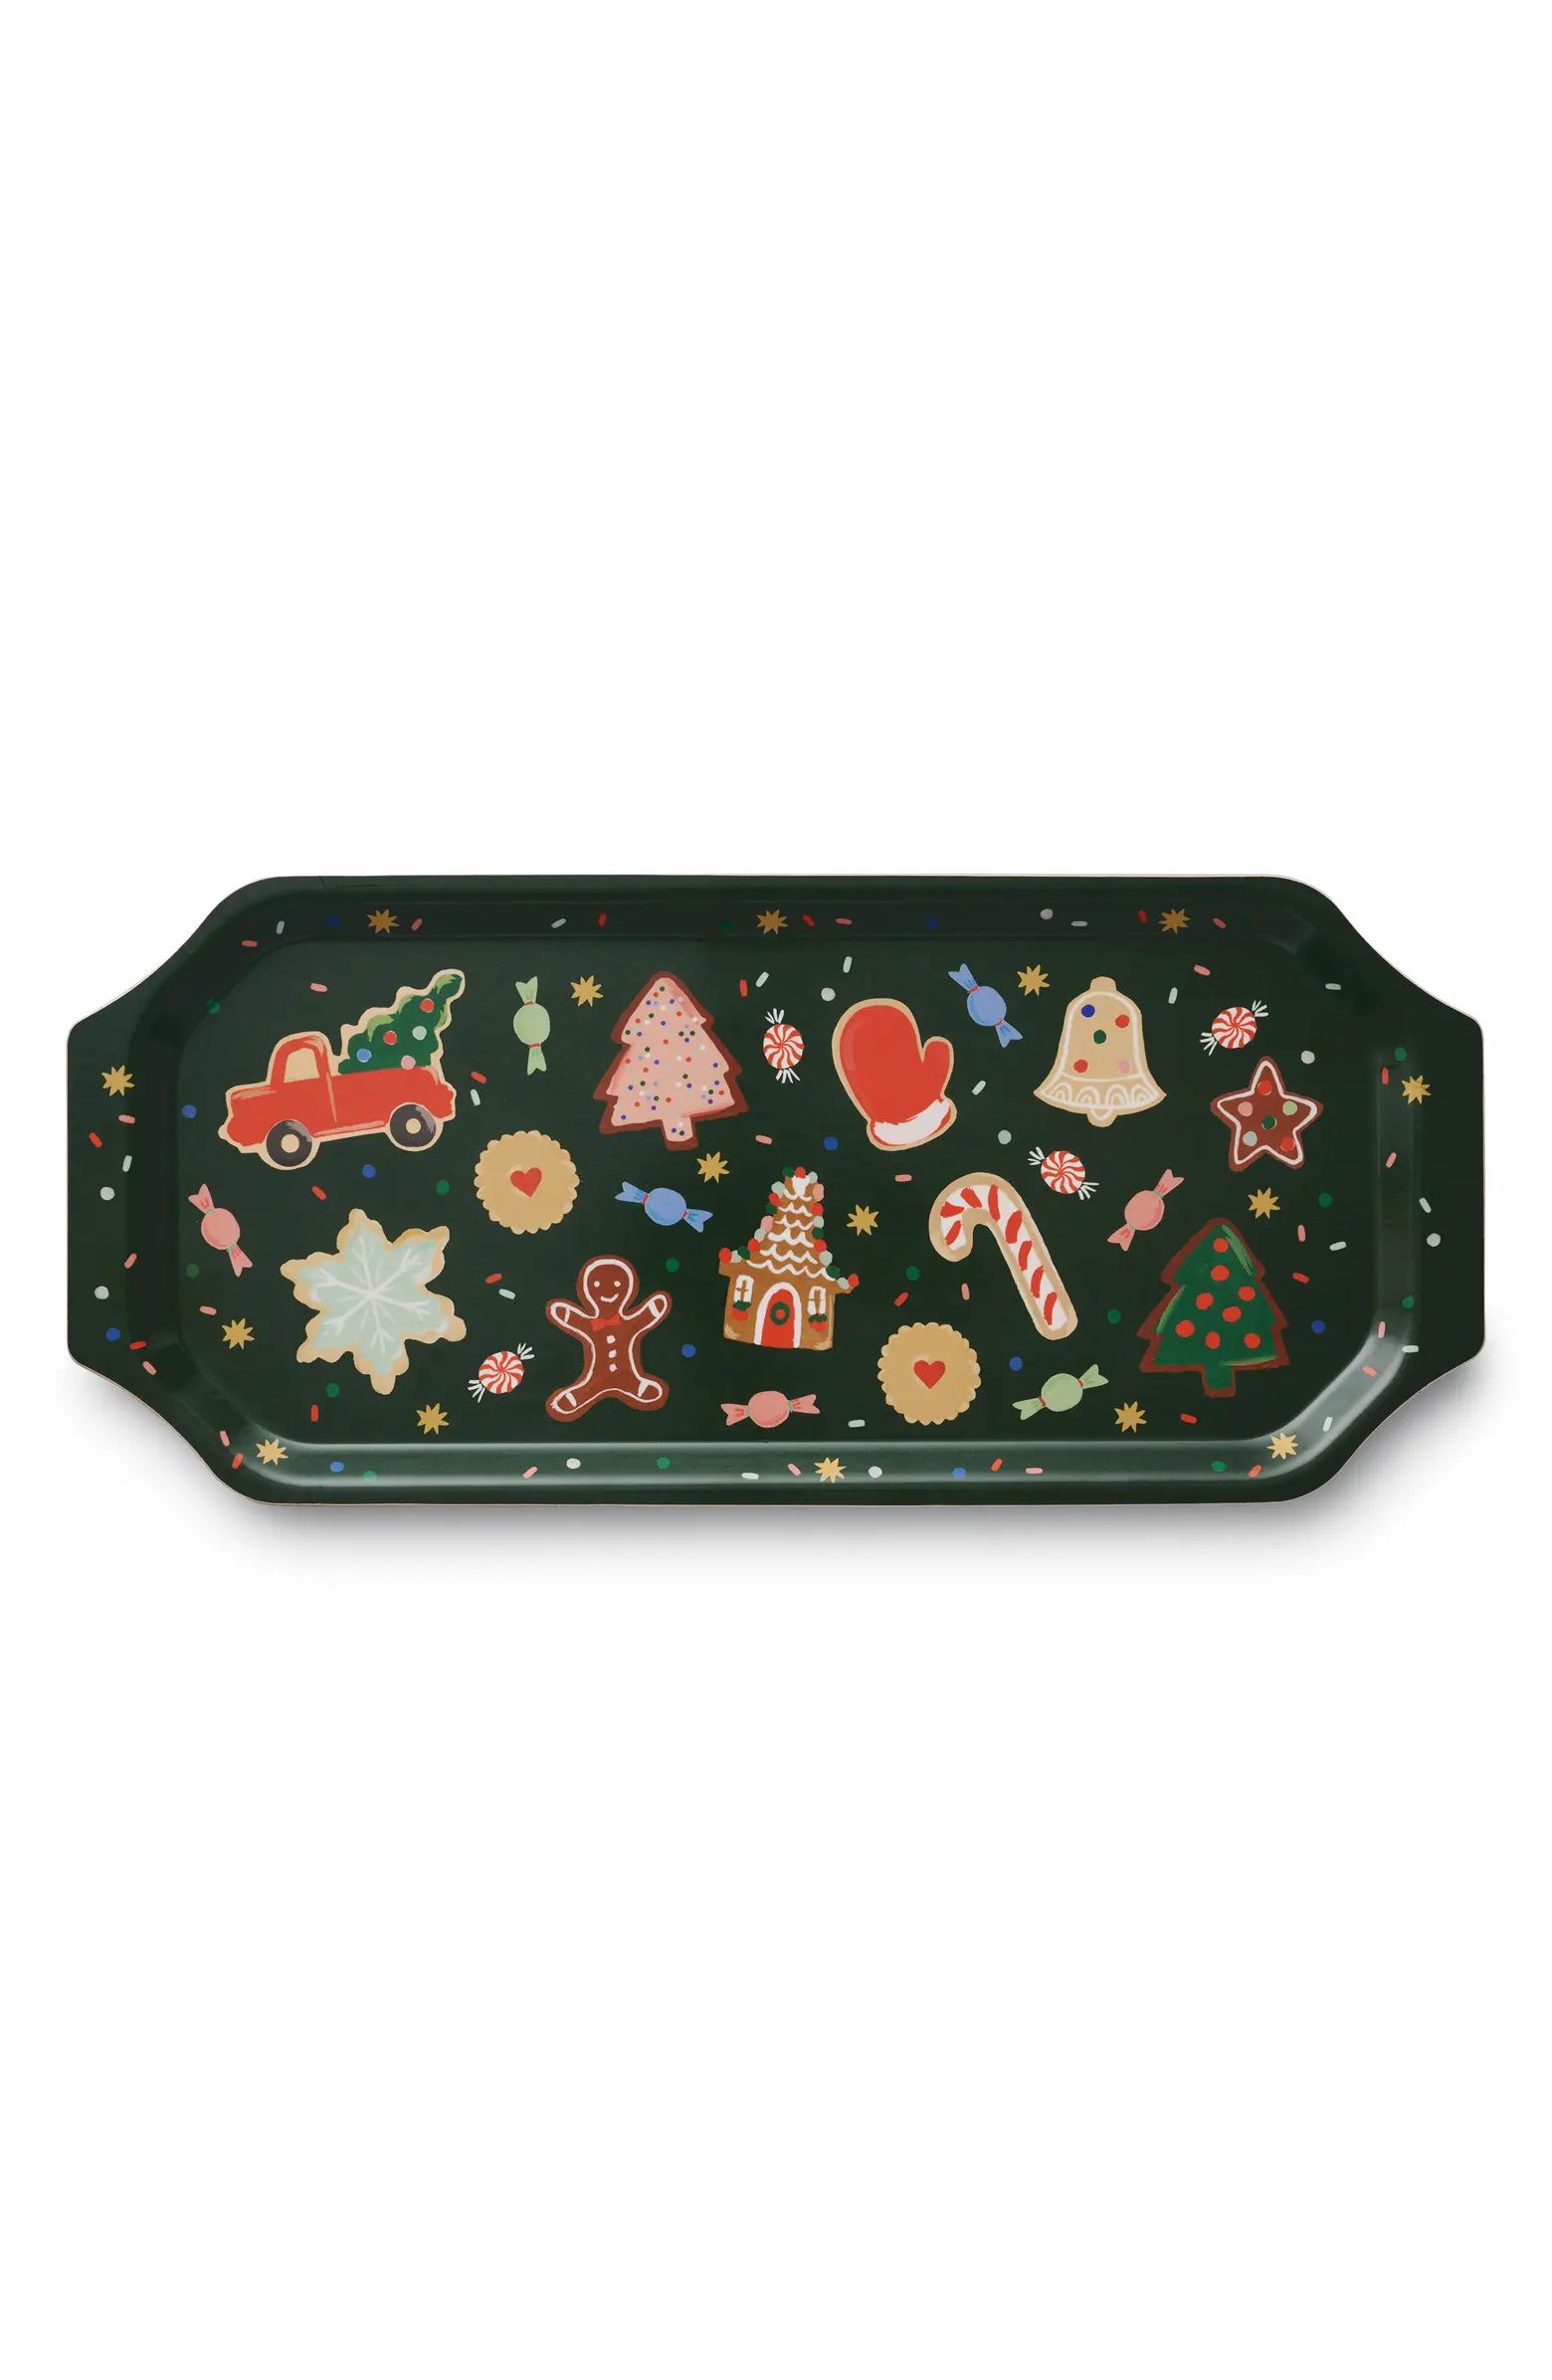 Rifle Paper Co. Christmas Cookies Oblong Tray | Nordstrom | Nordstrom